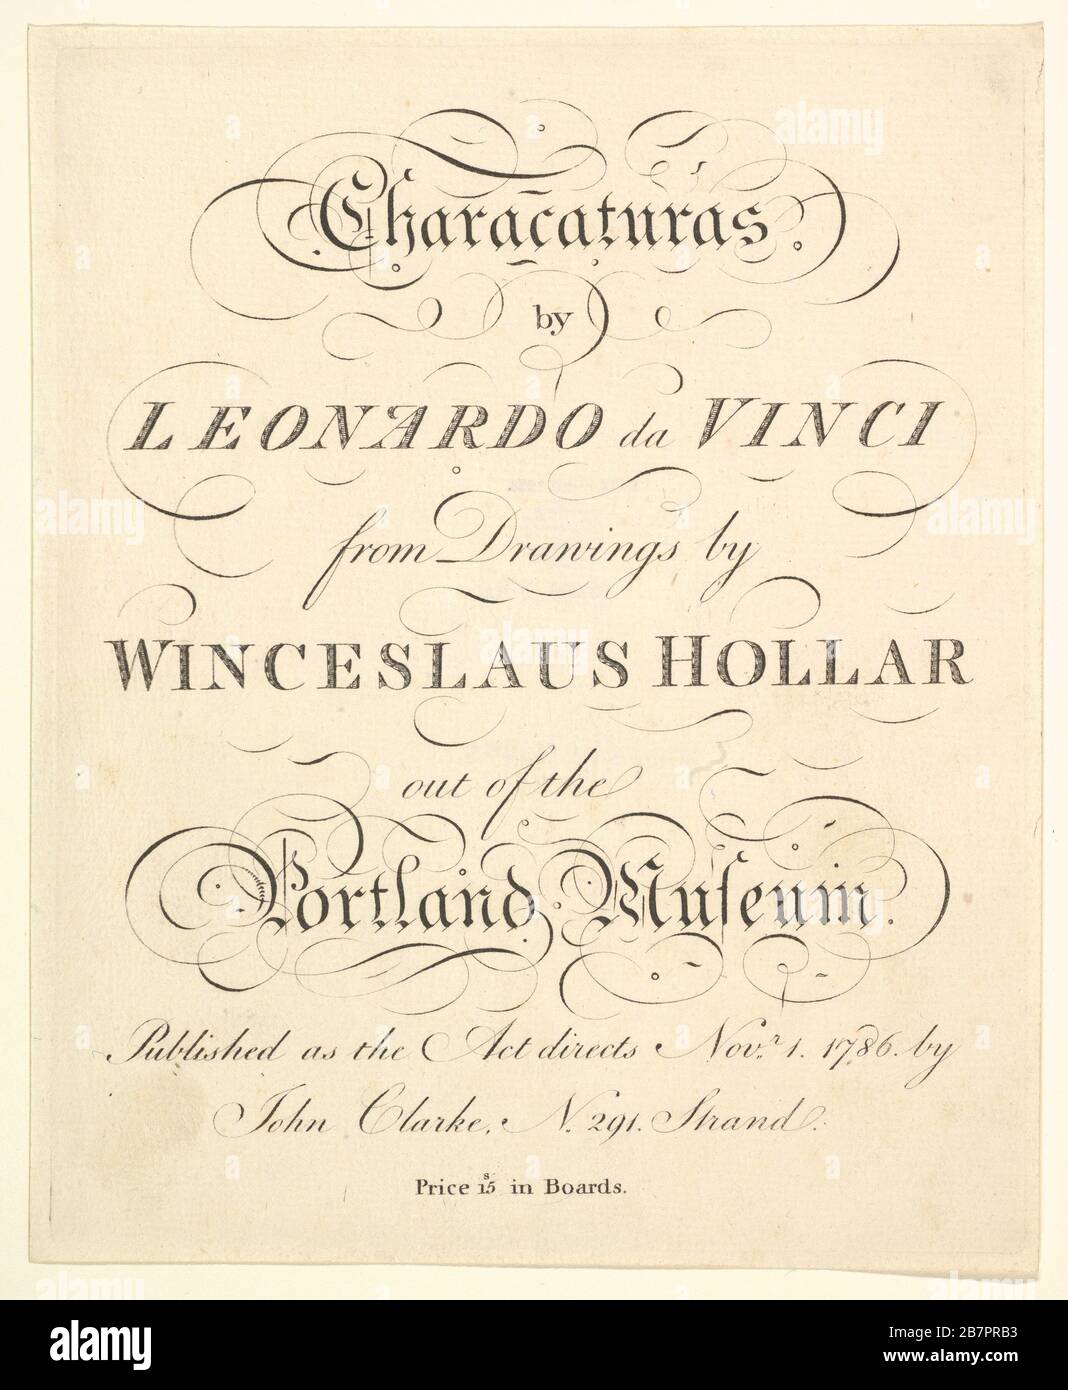 Title Page: Characaturas by Leonardo da Vinci, from Drawings by Wincelslaus Hollar, out of the Portland Museum, 1786. Stock Photo